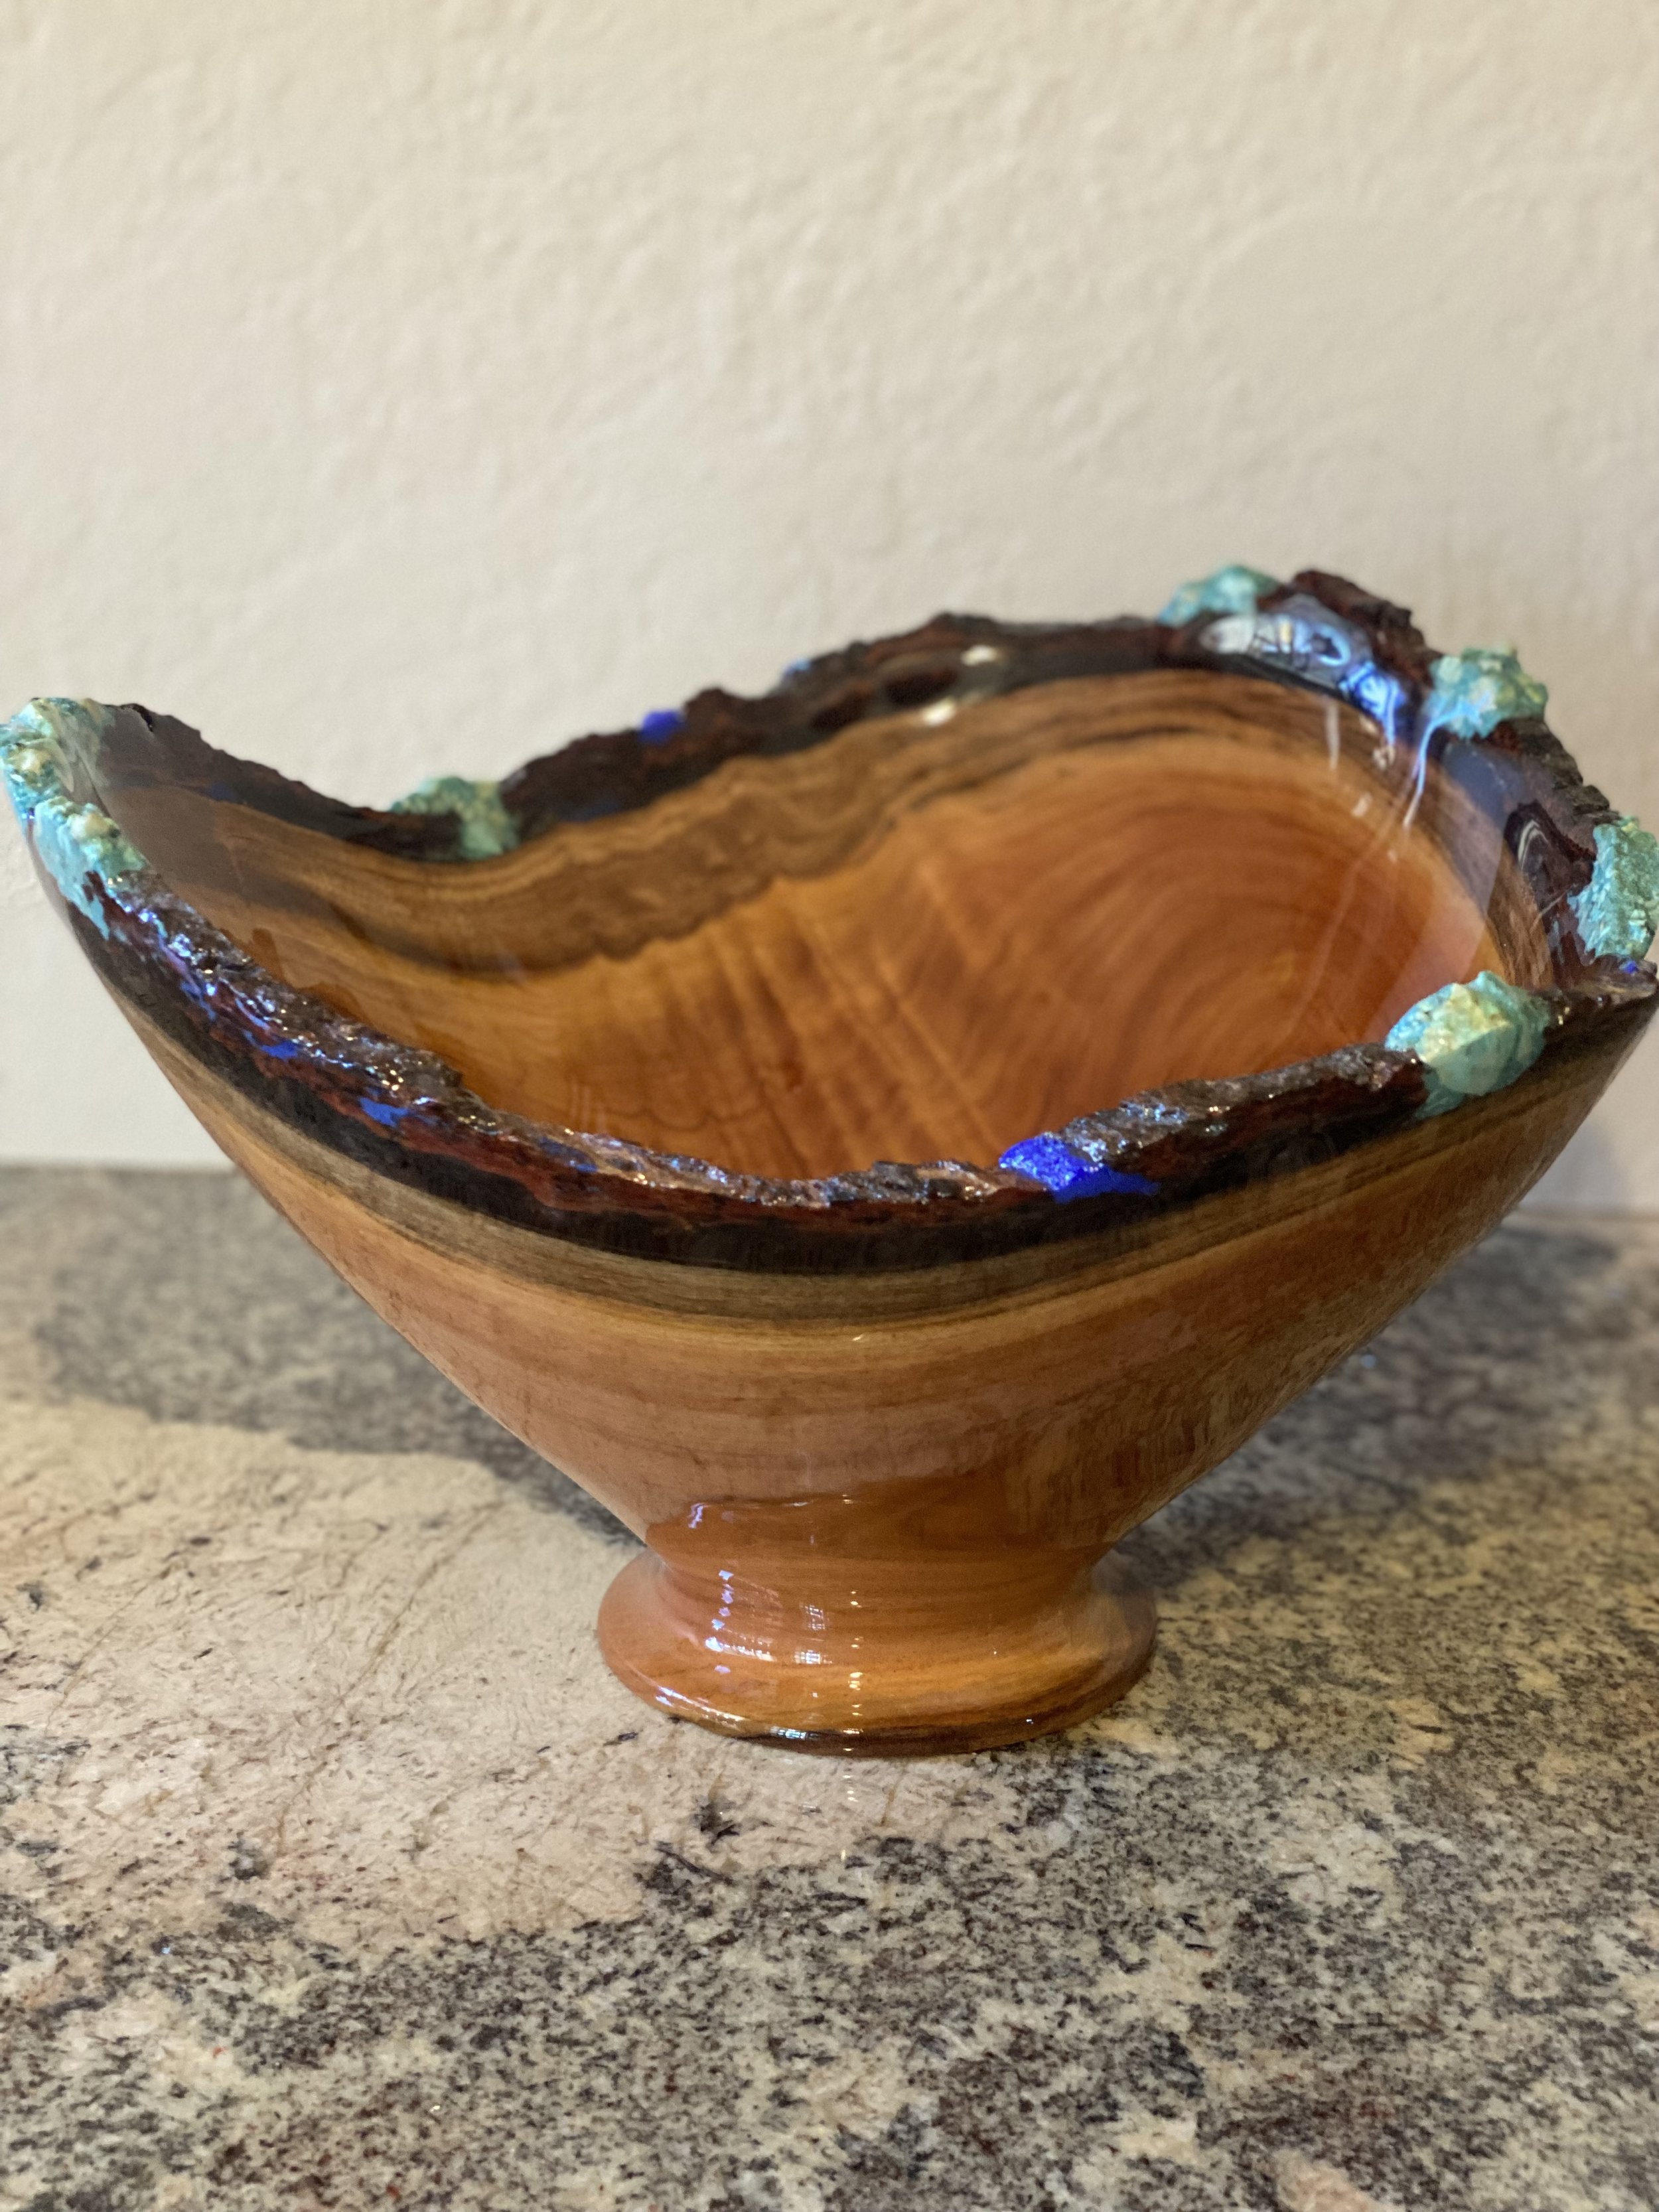 WOOD TURNING OBSESSION